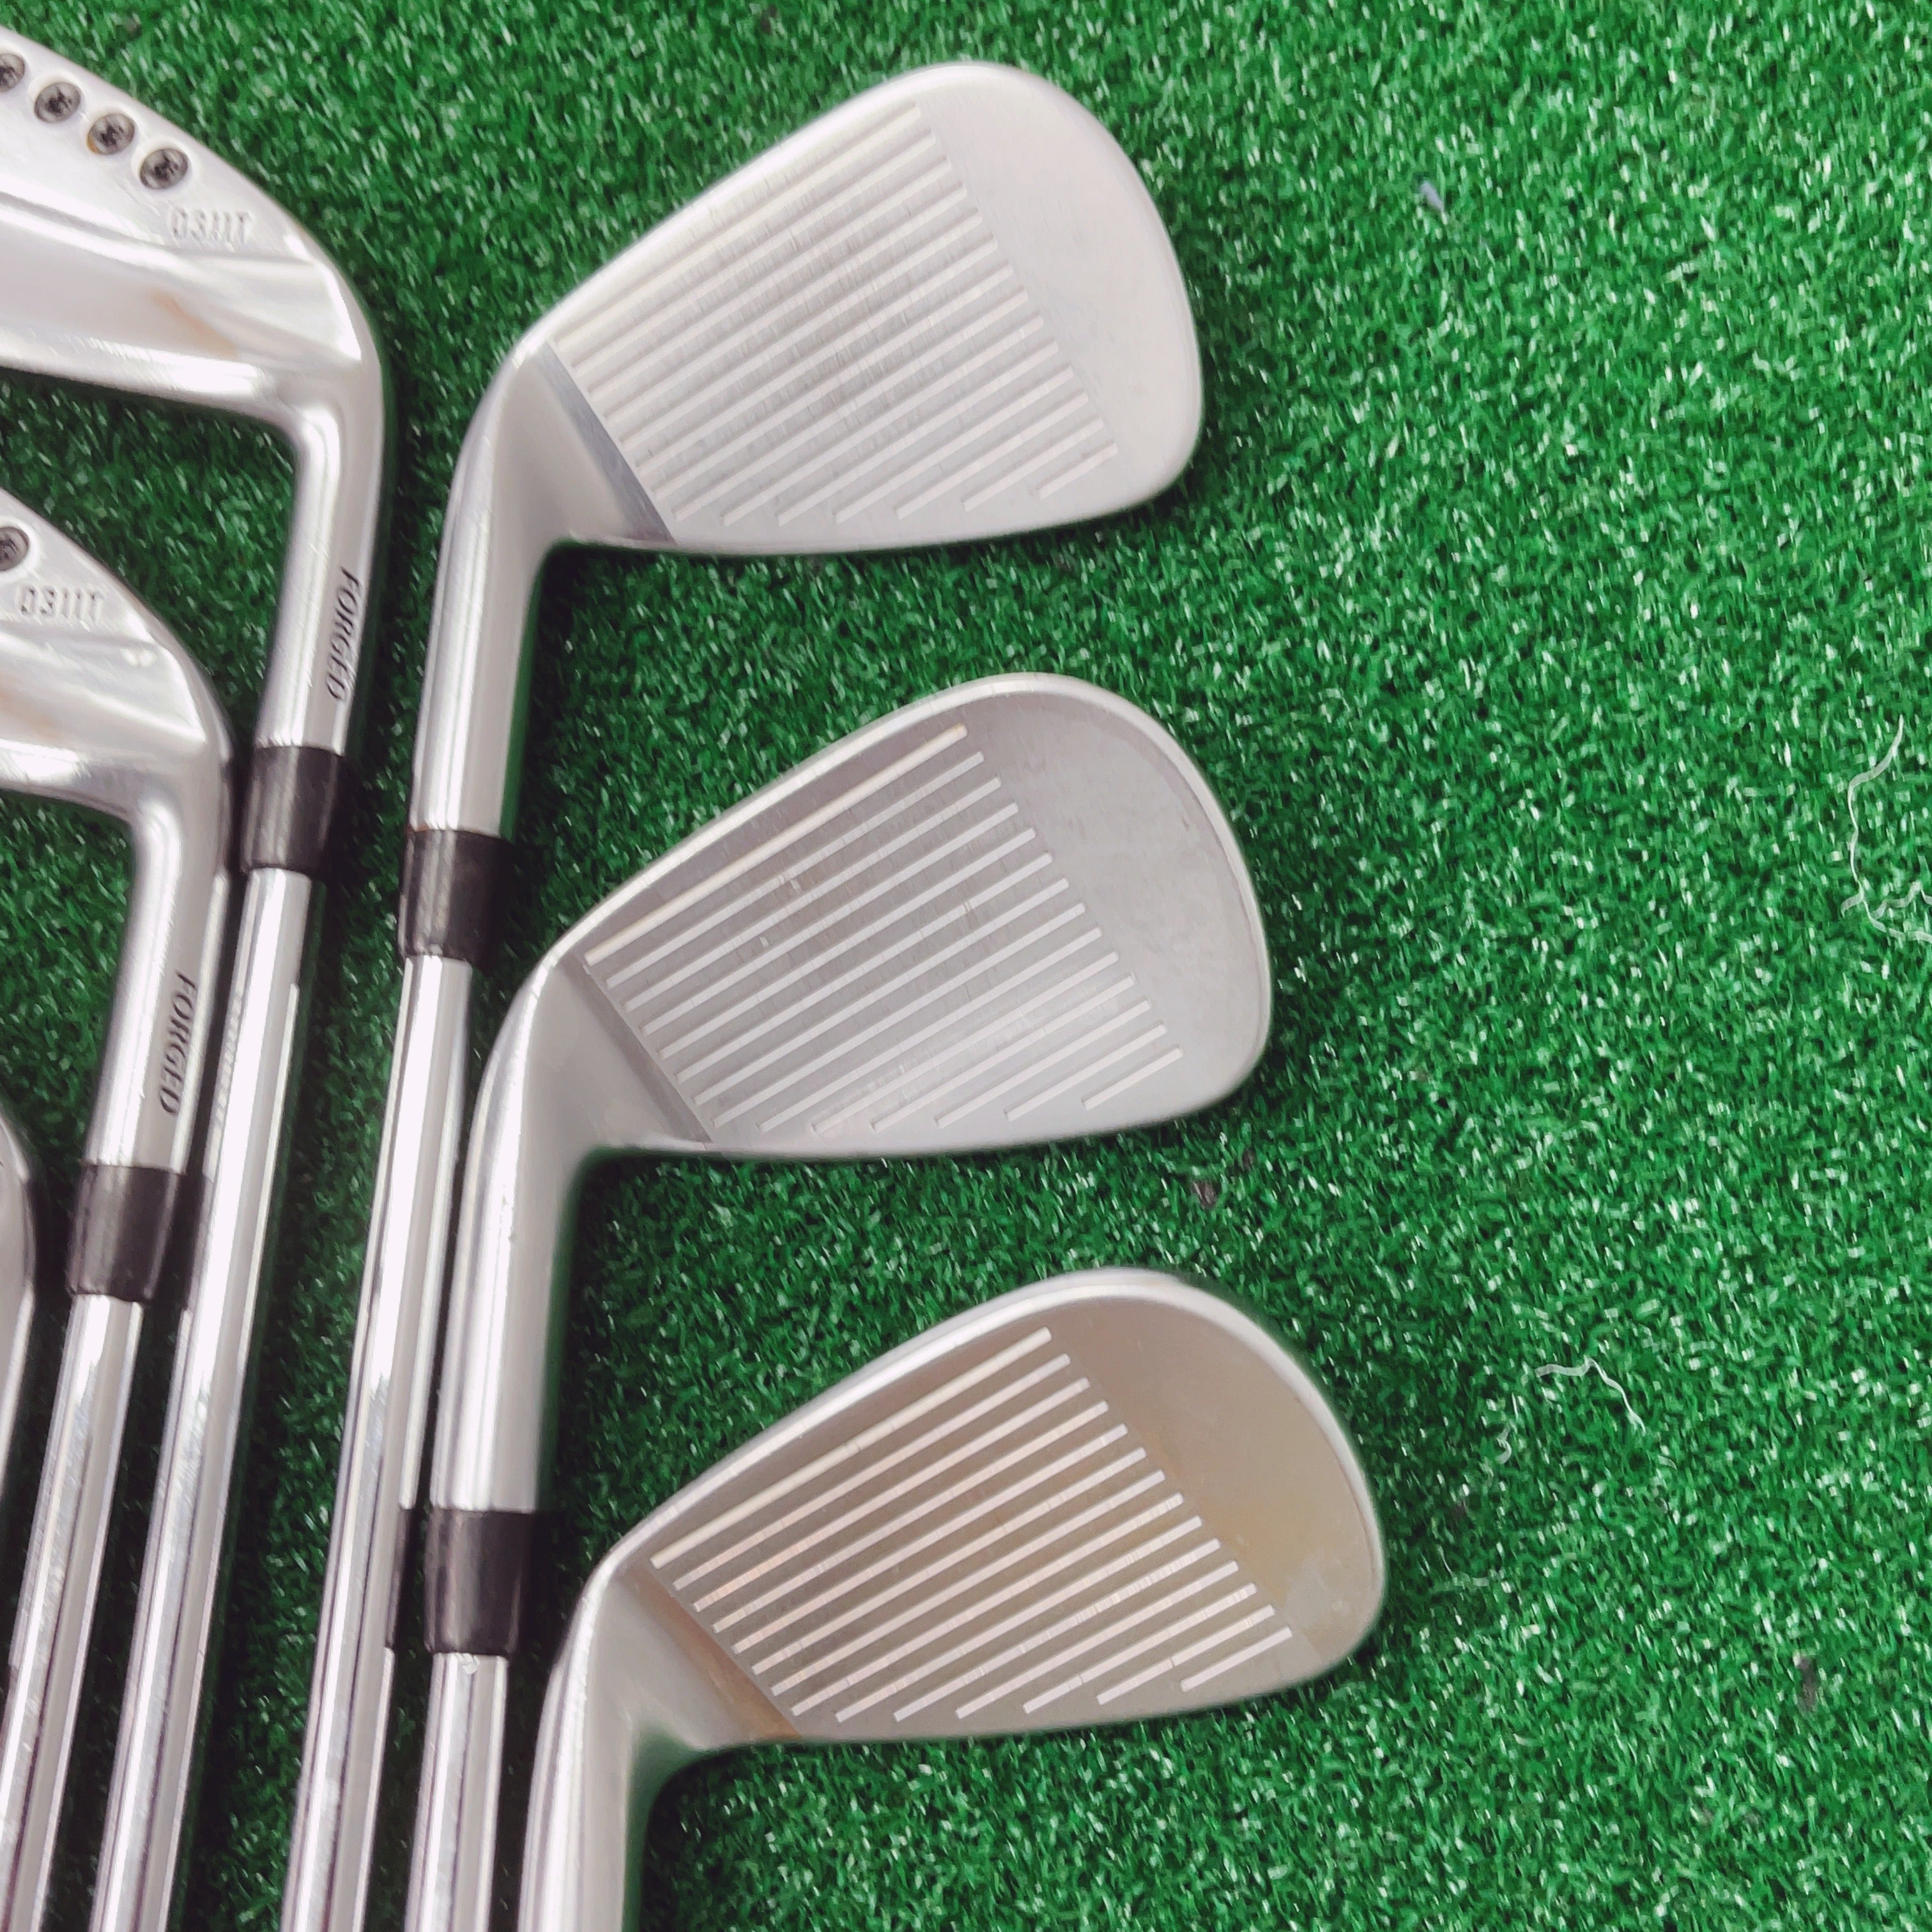 PXG GEN1 O311T IRONS / 4-PW / DYNAMIC GOLD TOUR ISSUE DYNAMIC GOLD X100 SHAFTS